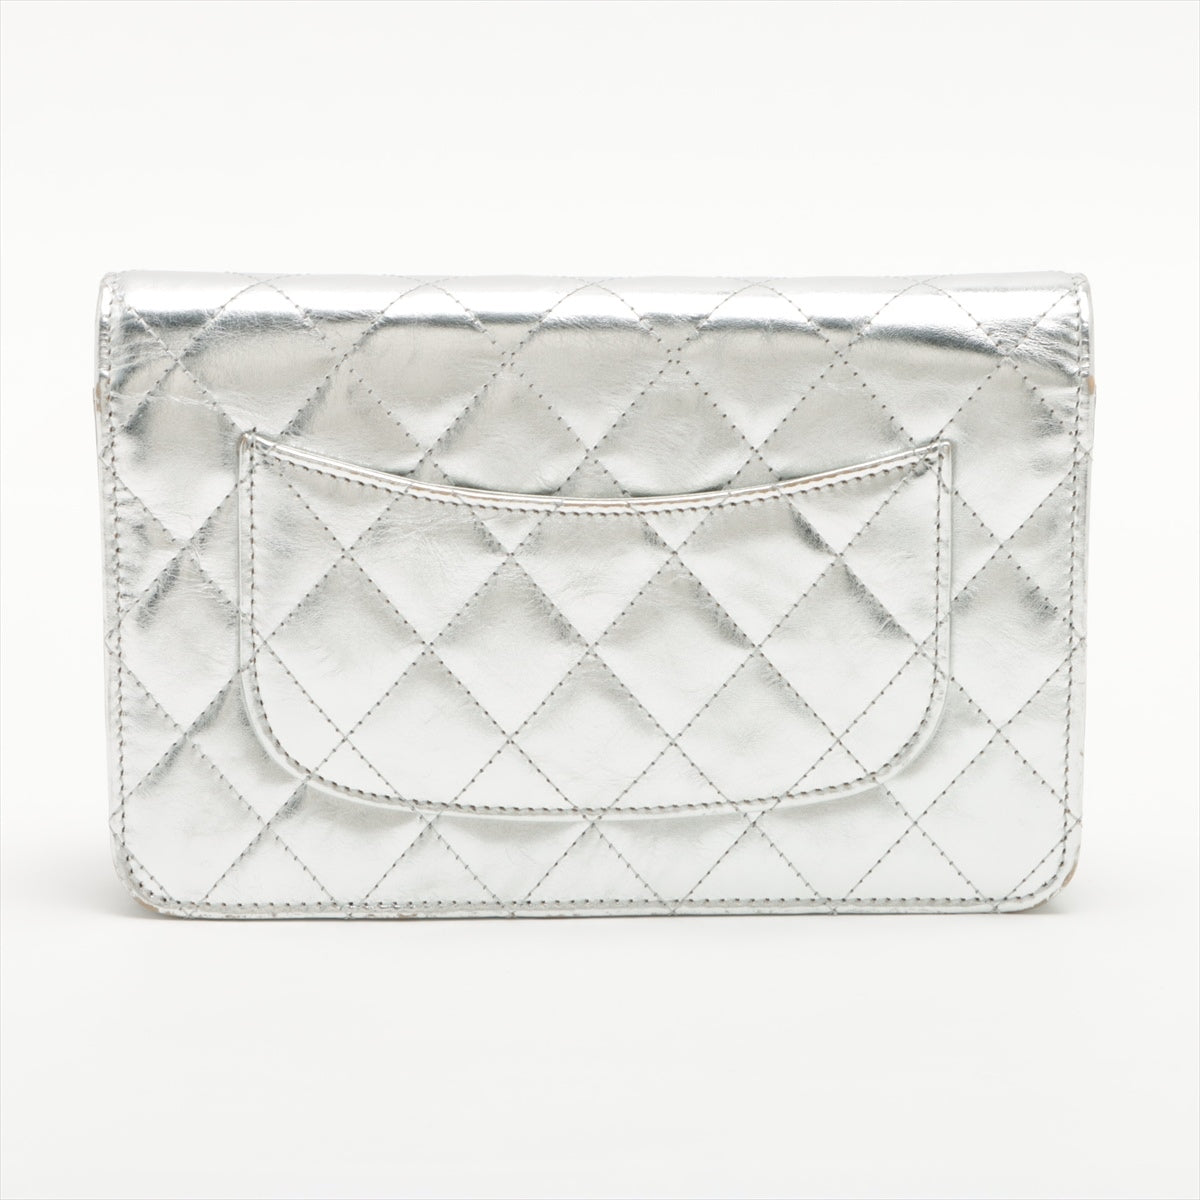 Chanel 2.55 Leather Chain Wallet Silver Silver